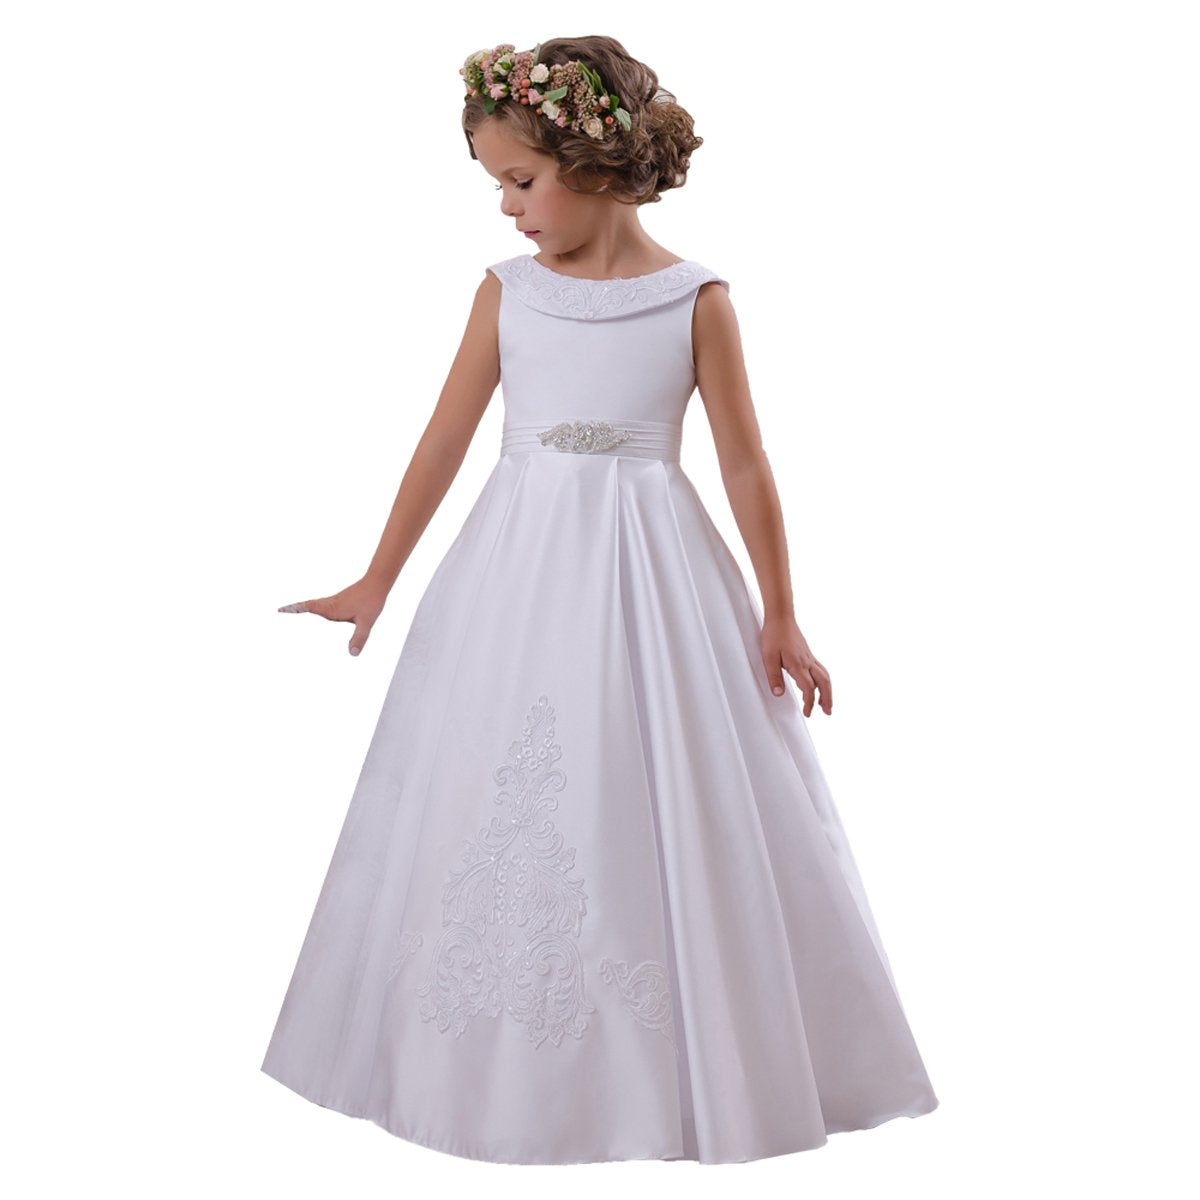 White Bridesmaid Dress Girls Flower Girl Dresses Ball Gown Kids Wedding  Party Pageant First Communion Gown